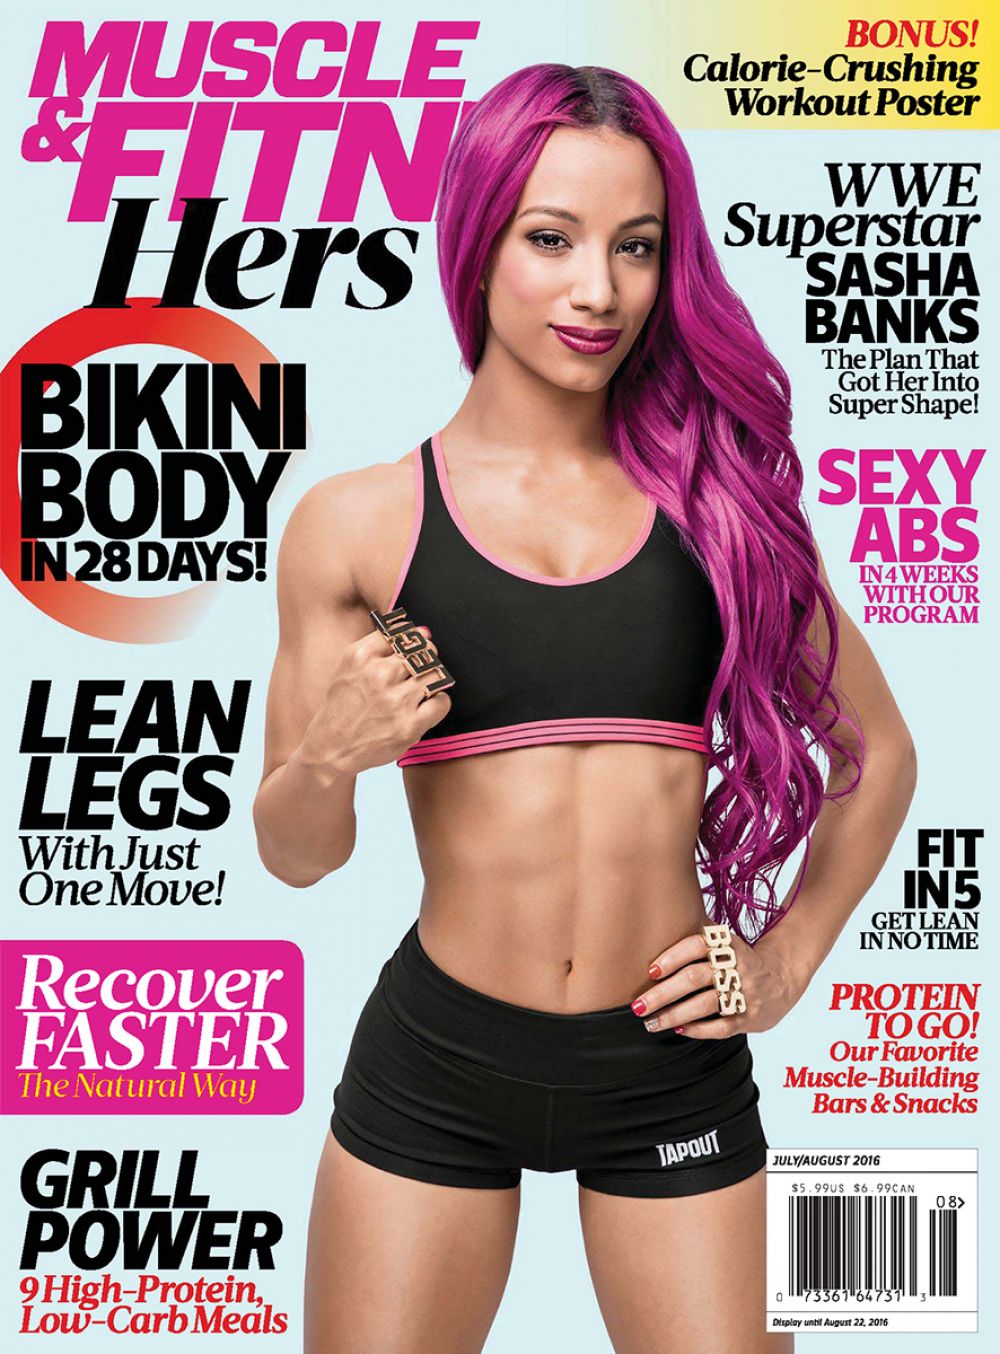 Wwe Sasha Banks In Muscle Fitness Hers Magazine July August